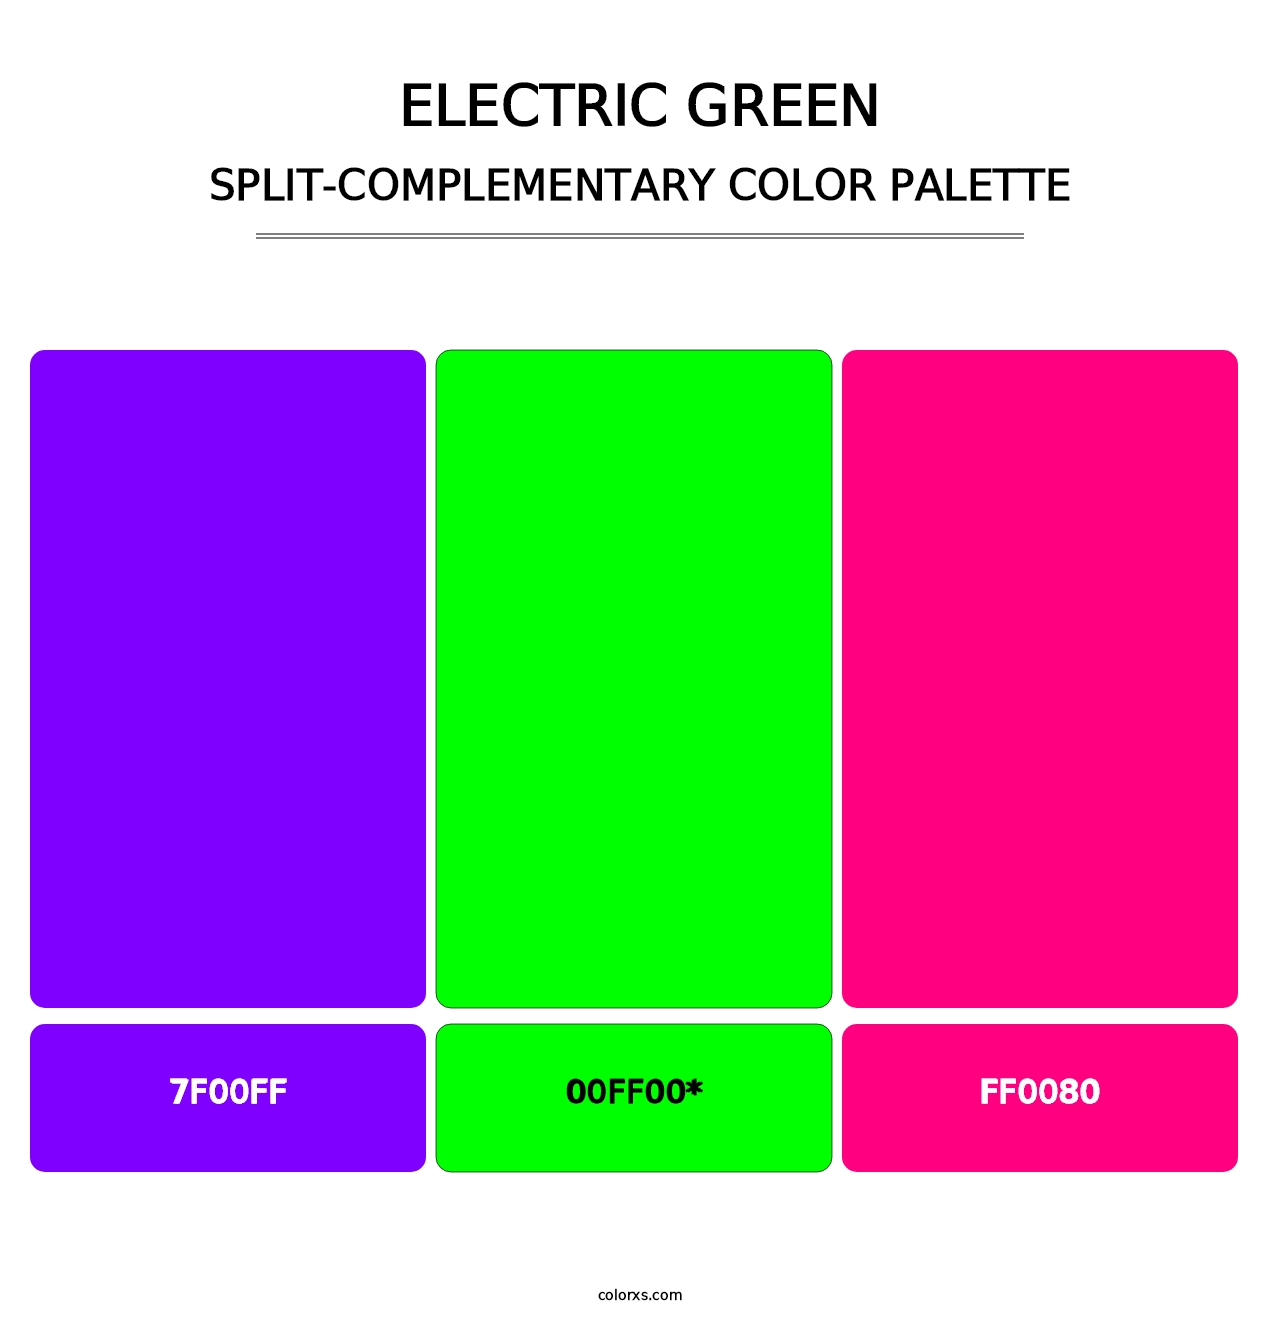 Electric Green - Split-Complementary Color Palette